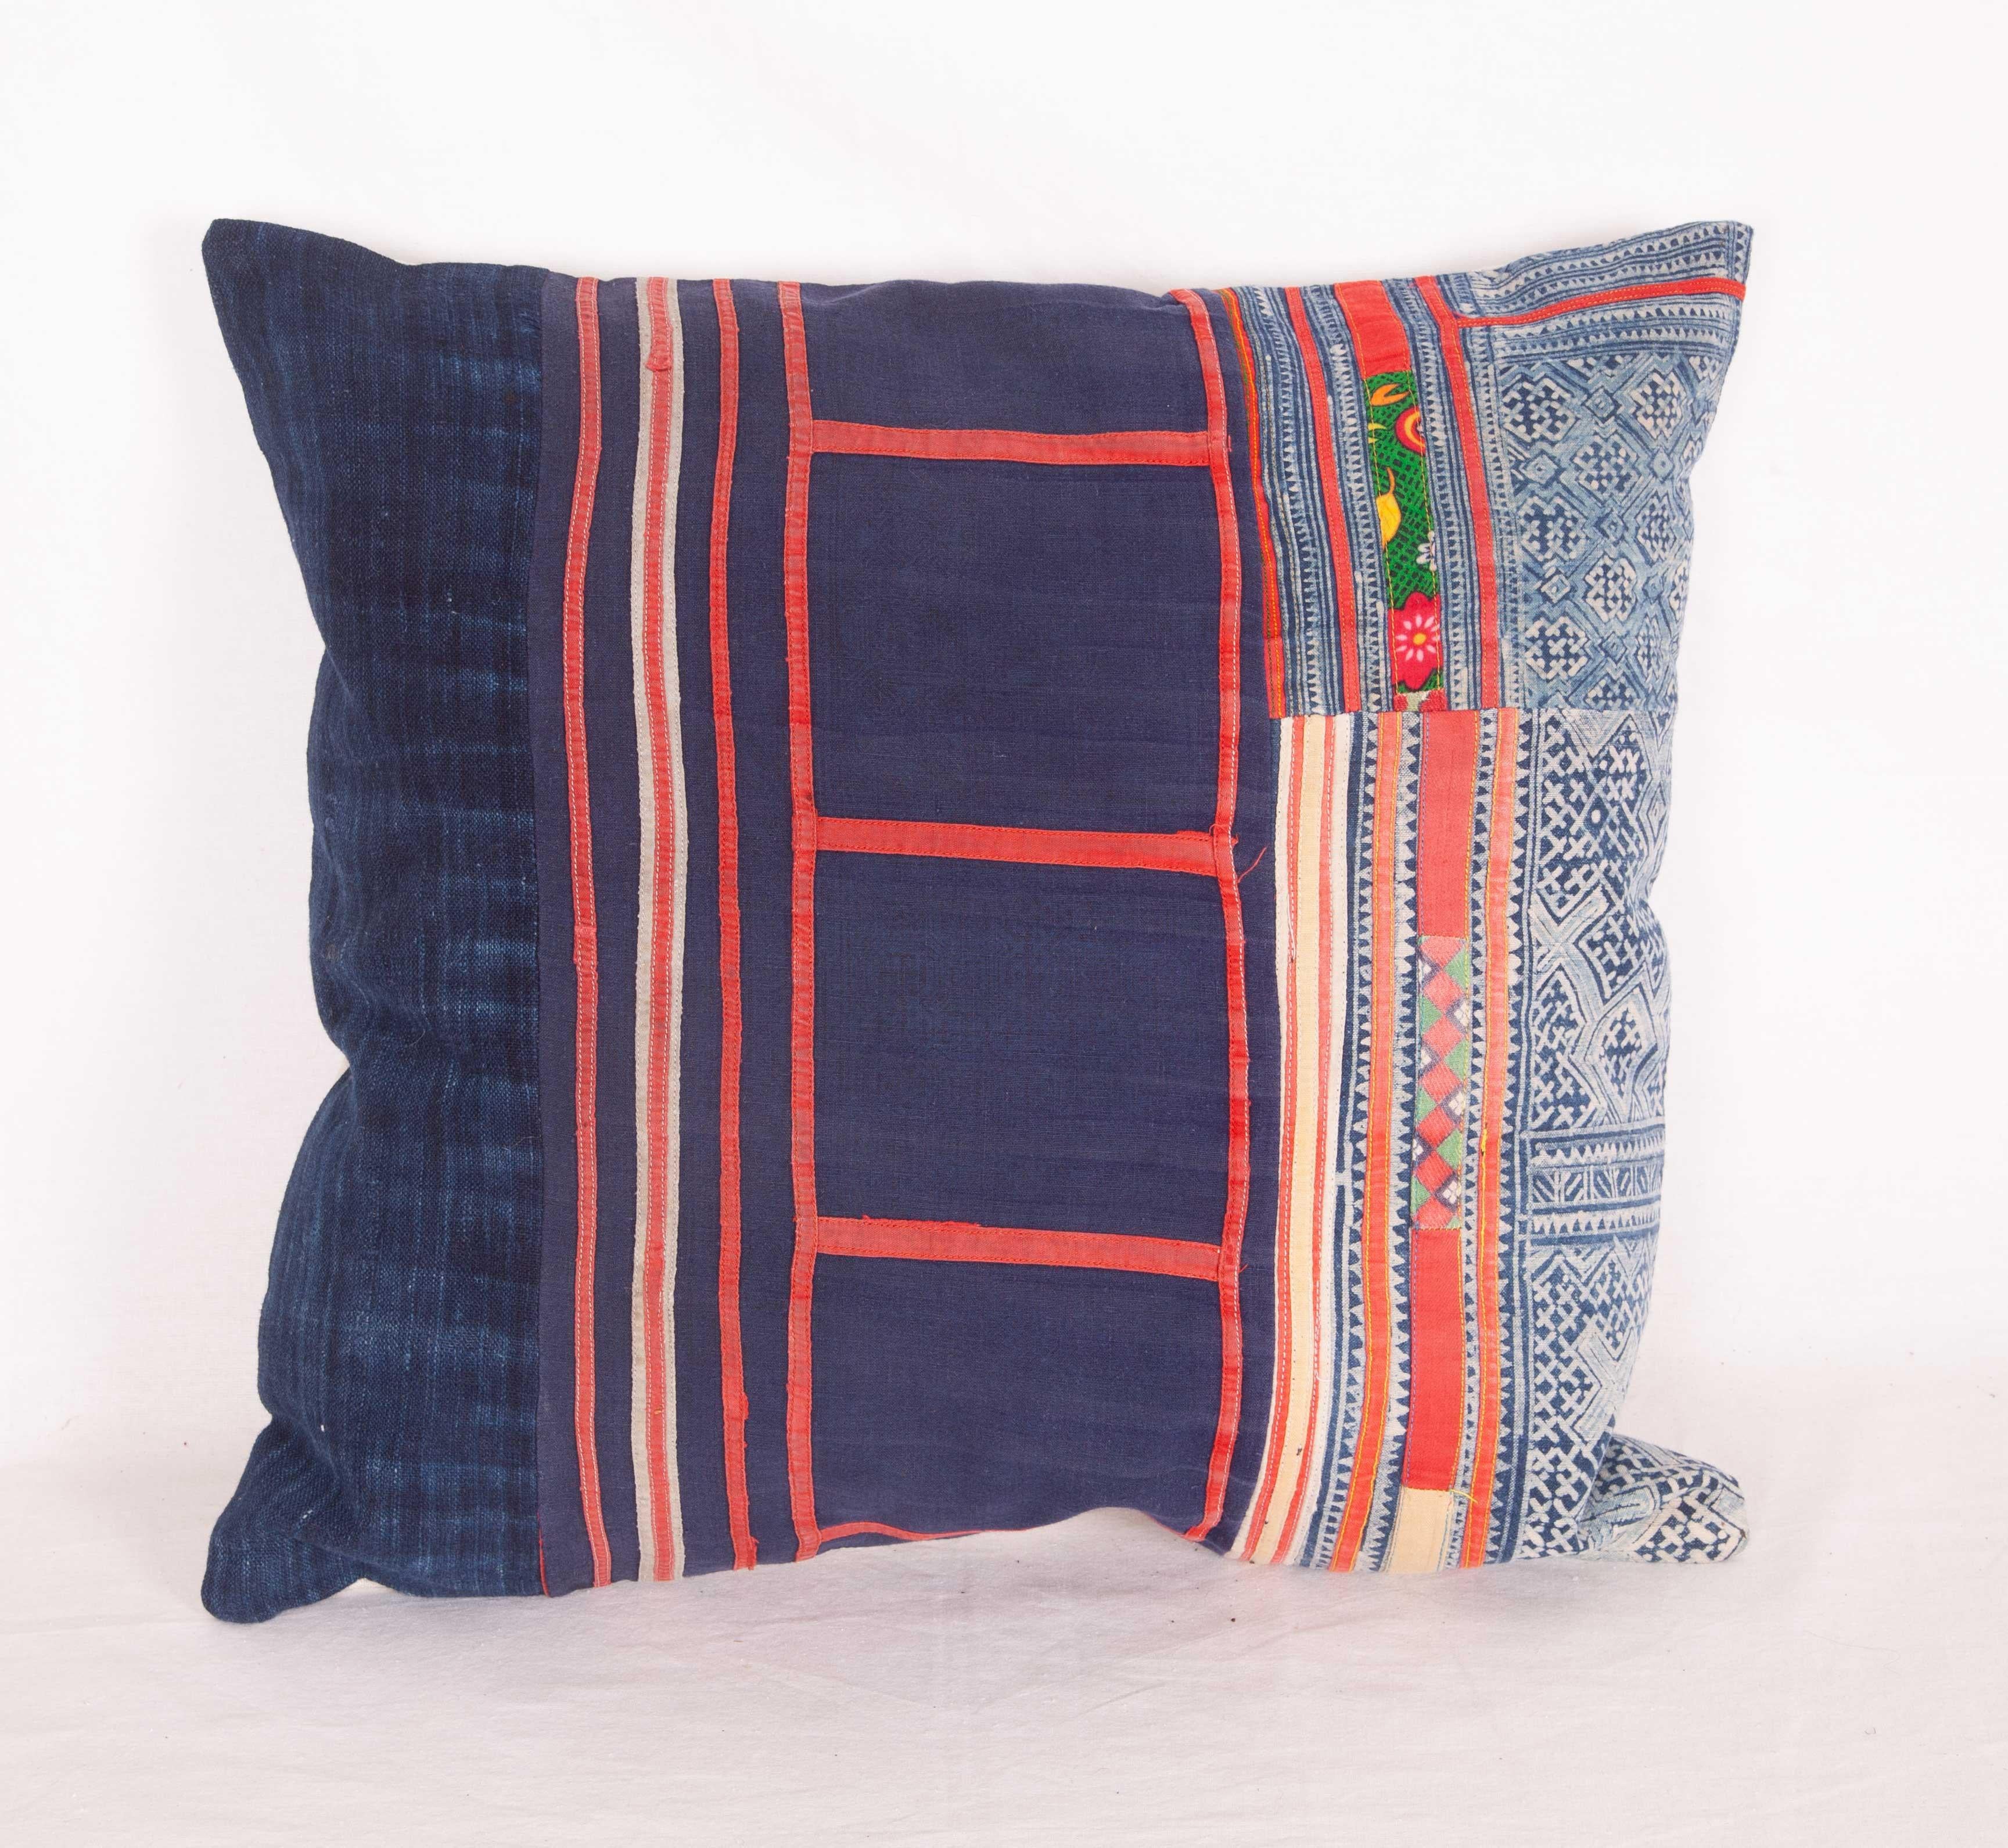 Thai Vintage Pillow Cases / Cushions Made from a Hmong Hill Tribe Batik Textile